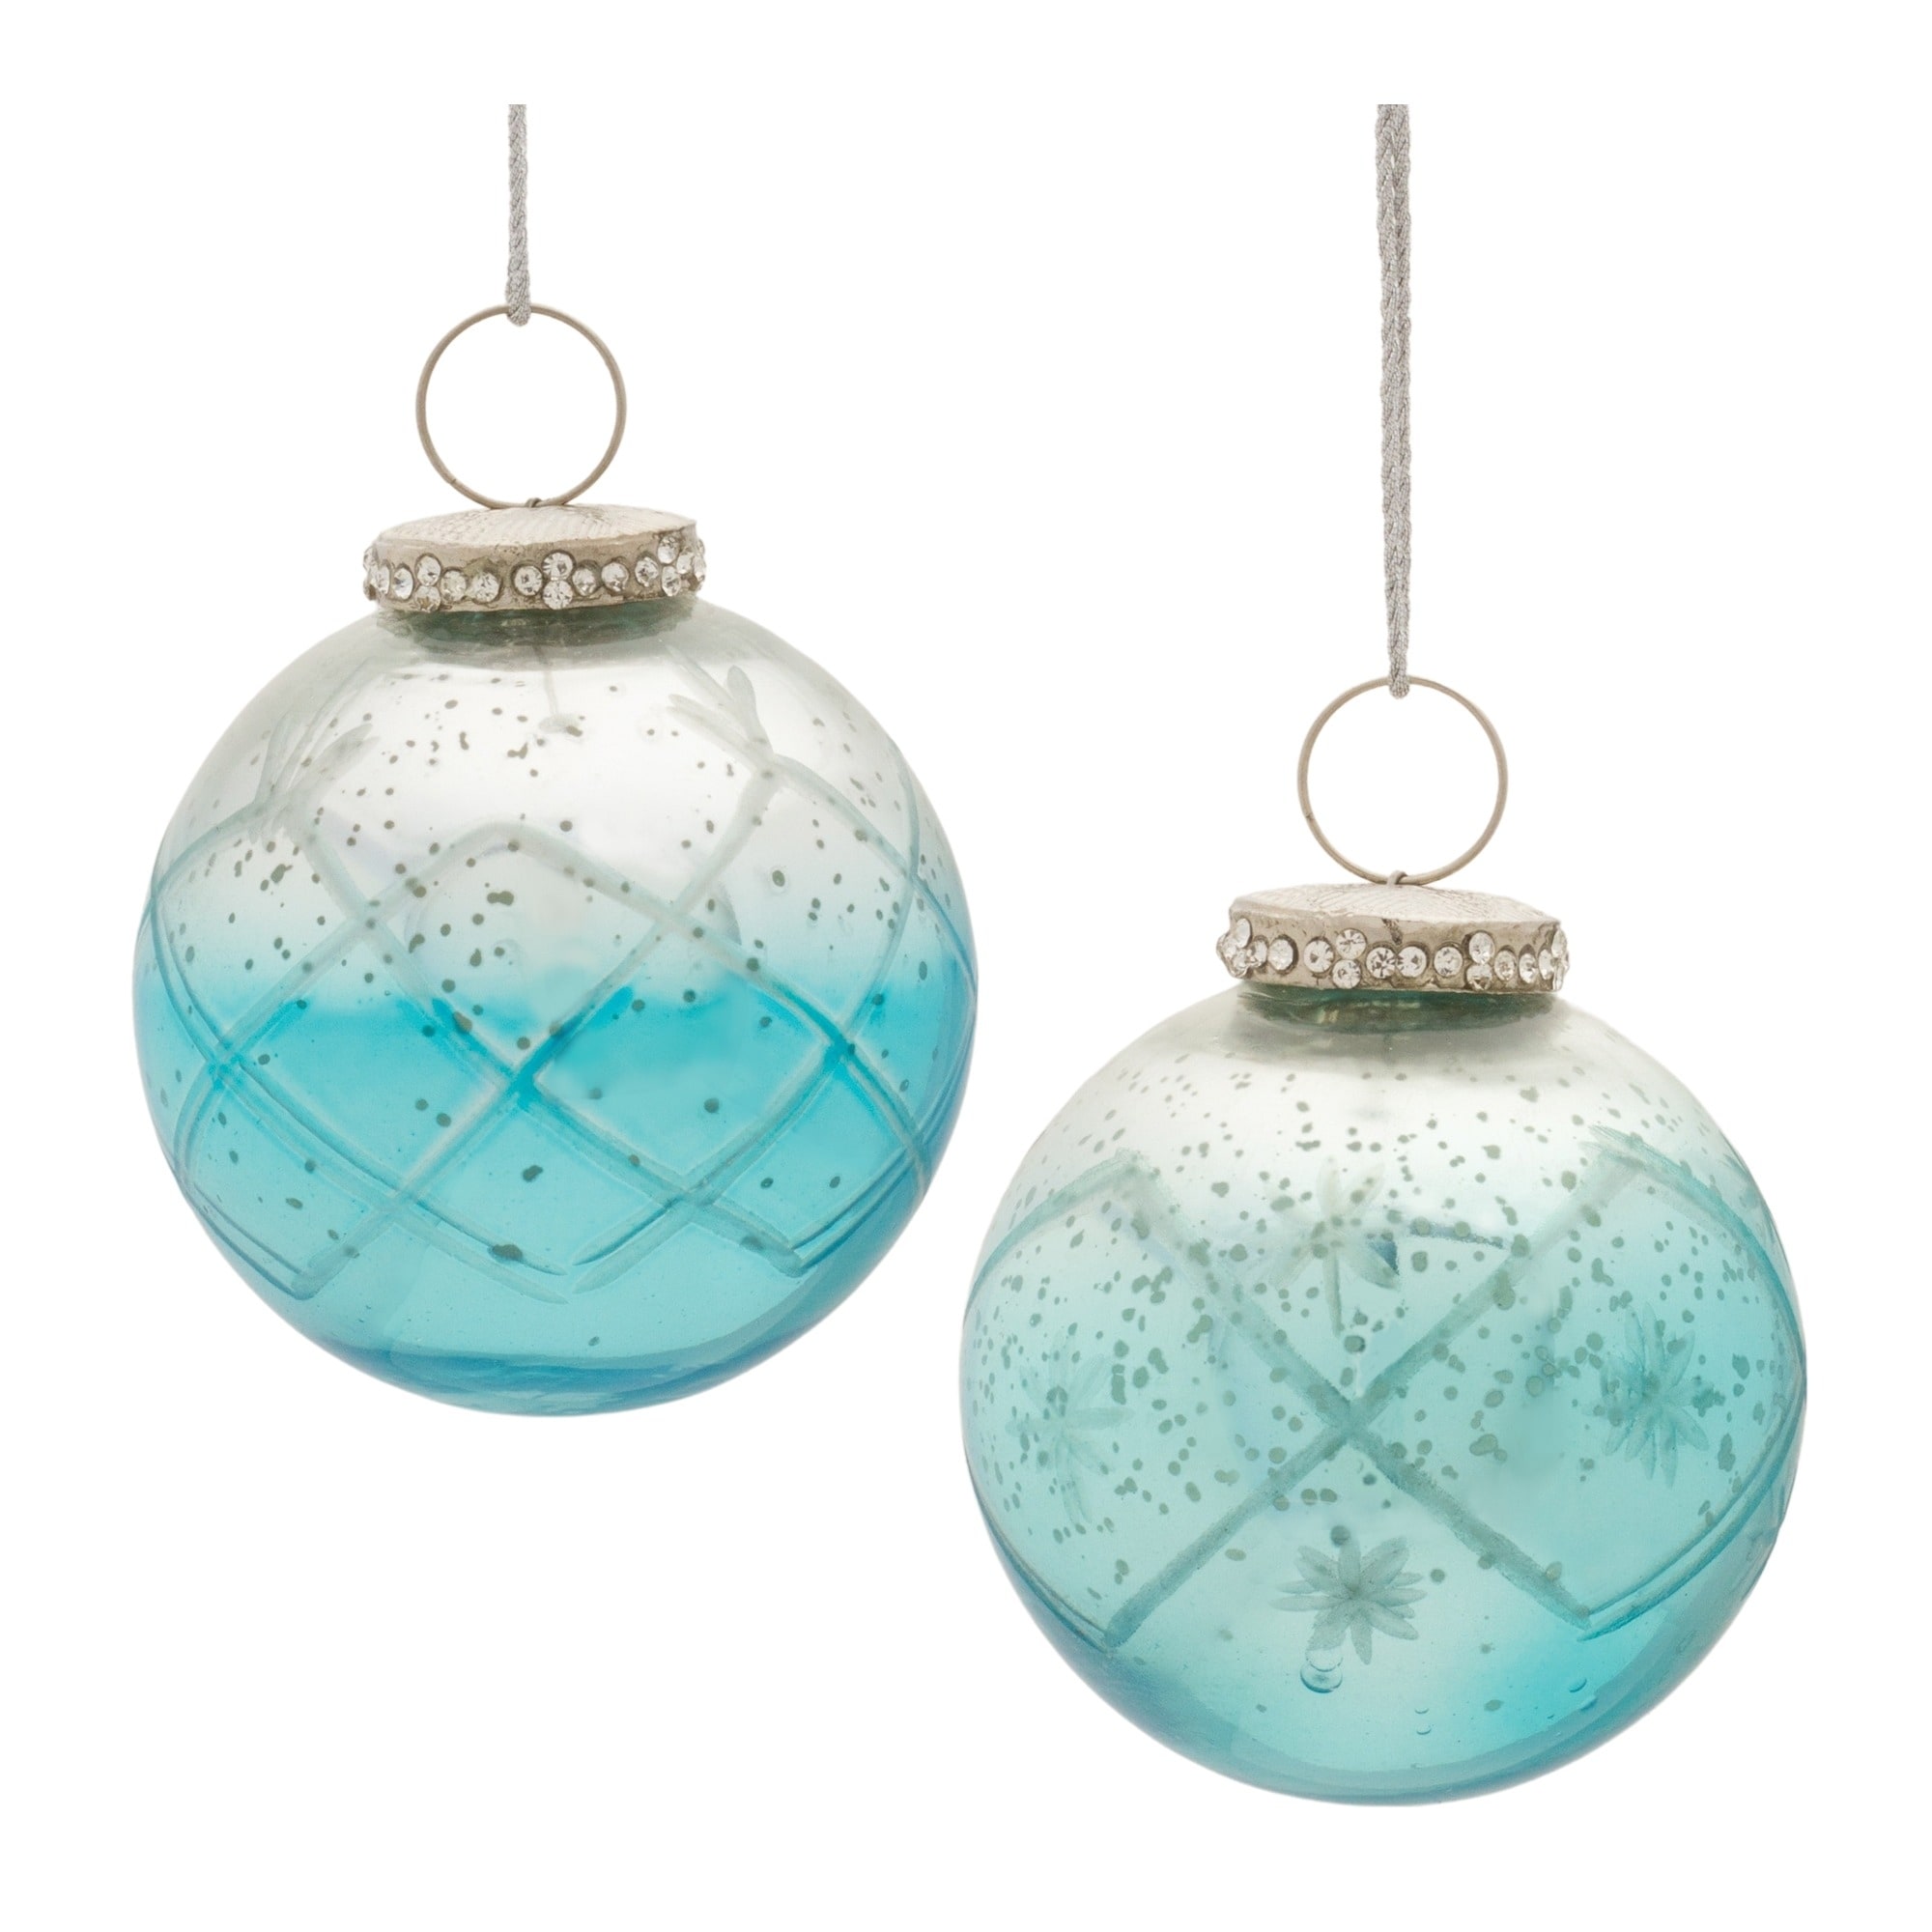 12ct Silver & Blue Iridescent Glass Christmas Ball Ornaments 4 (101mm)